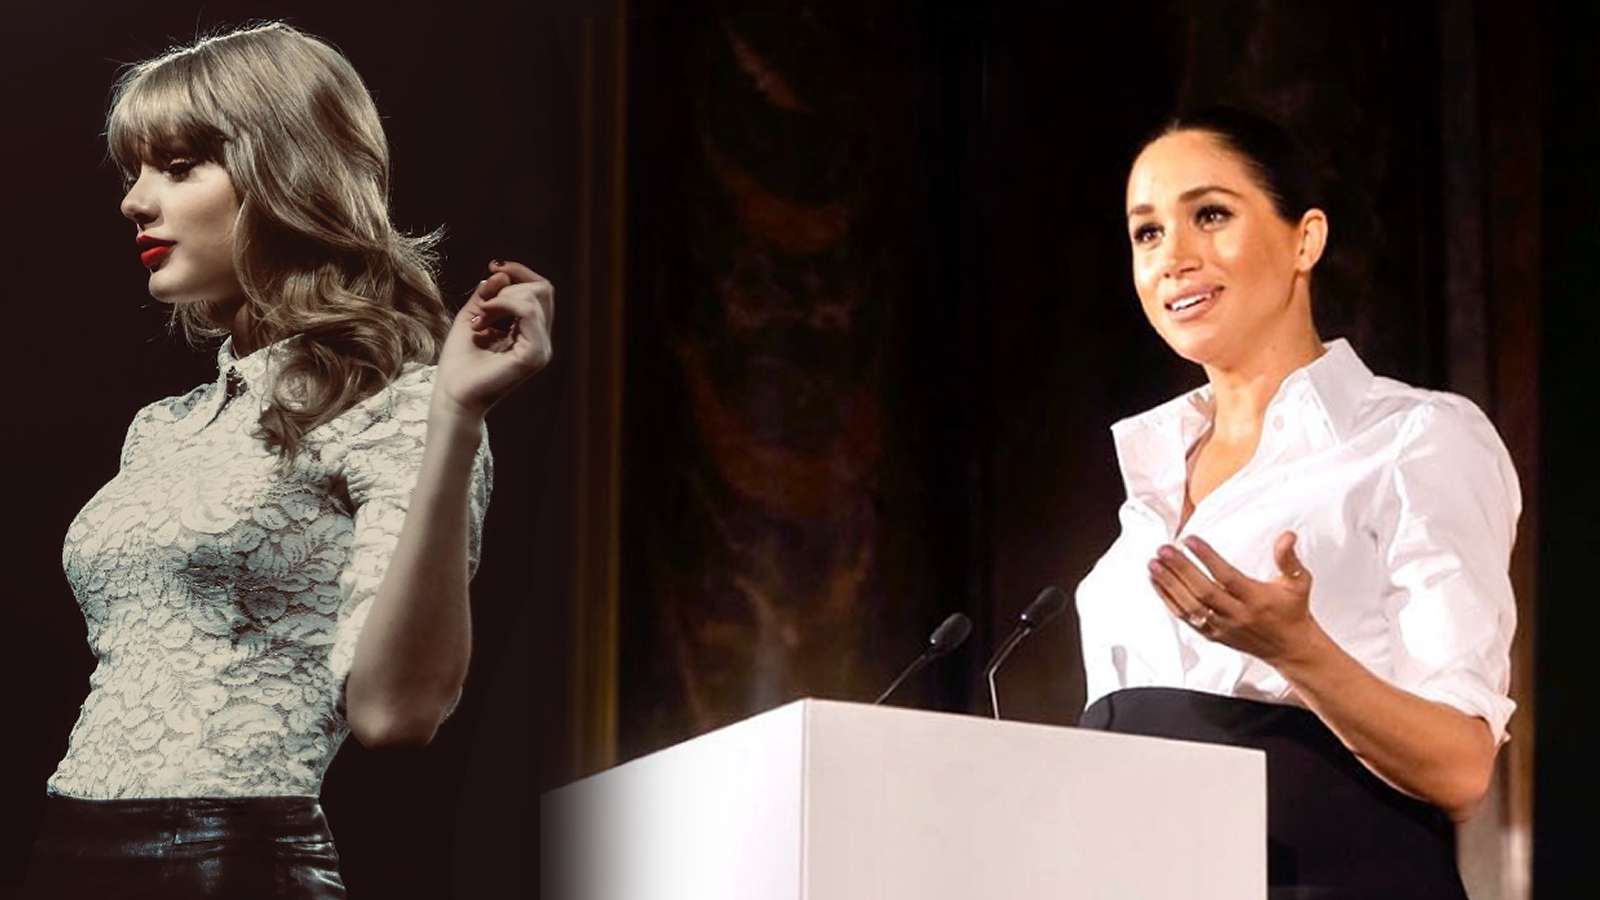 Taylor Swift turned down Meghan Markle’s invite to appear on her podcast